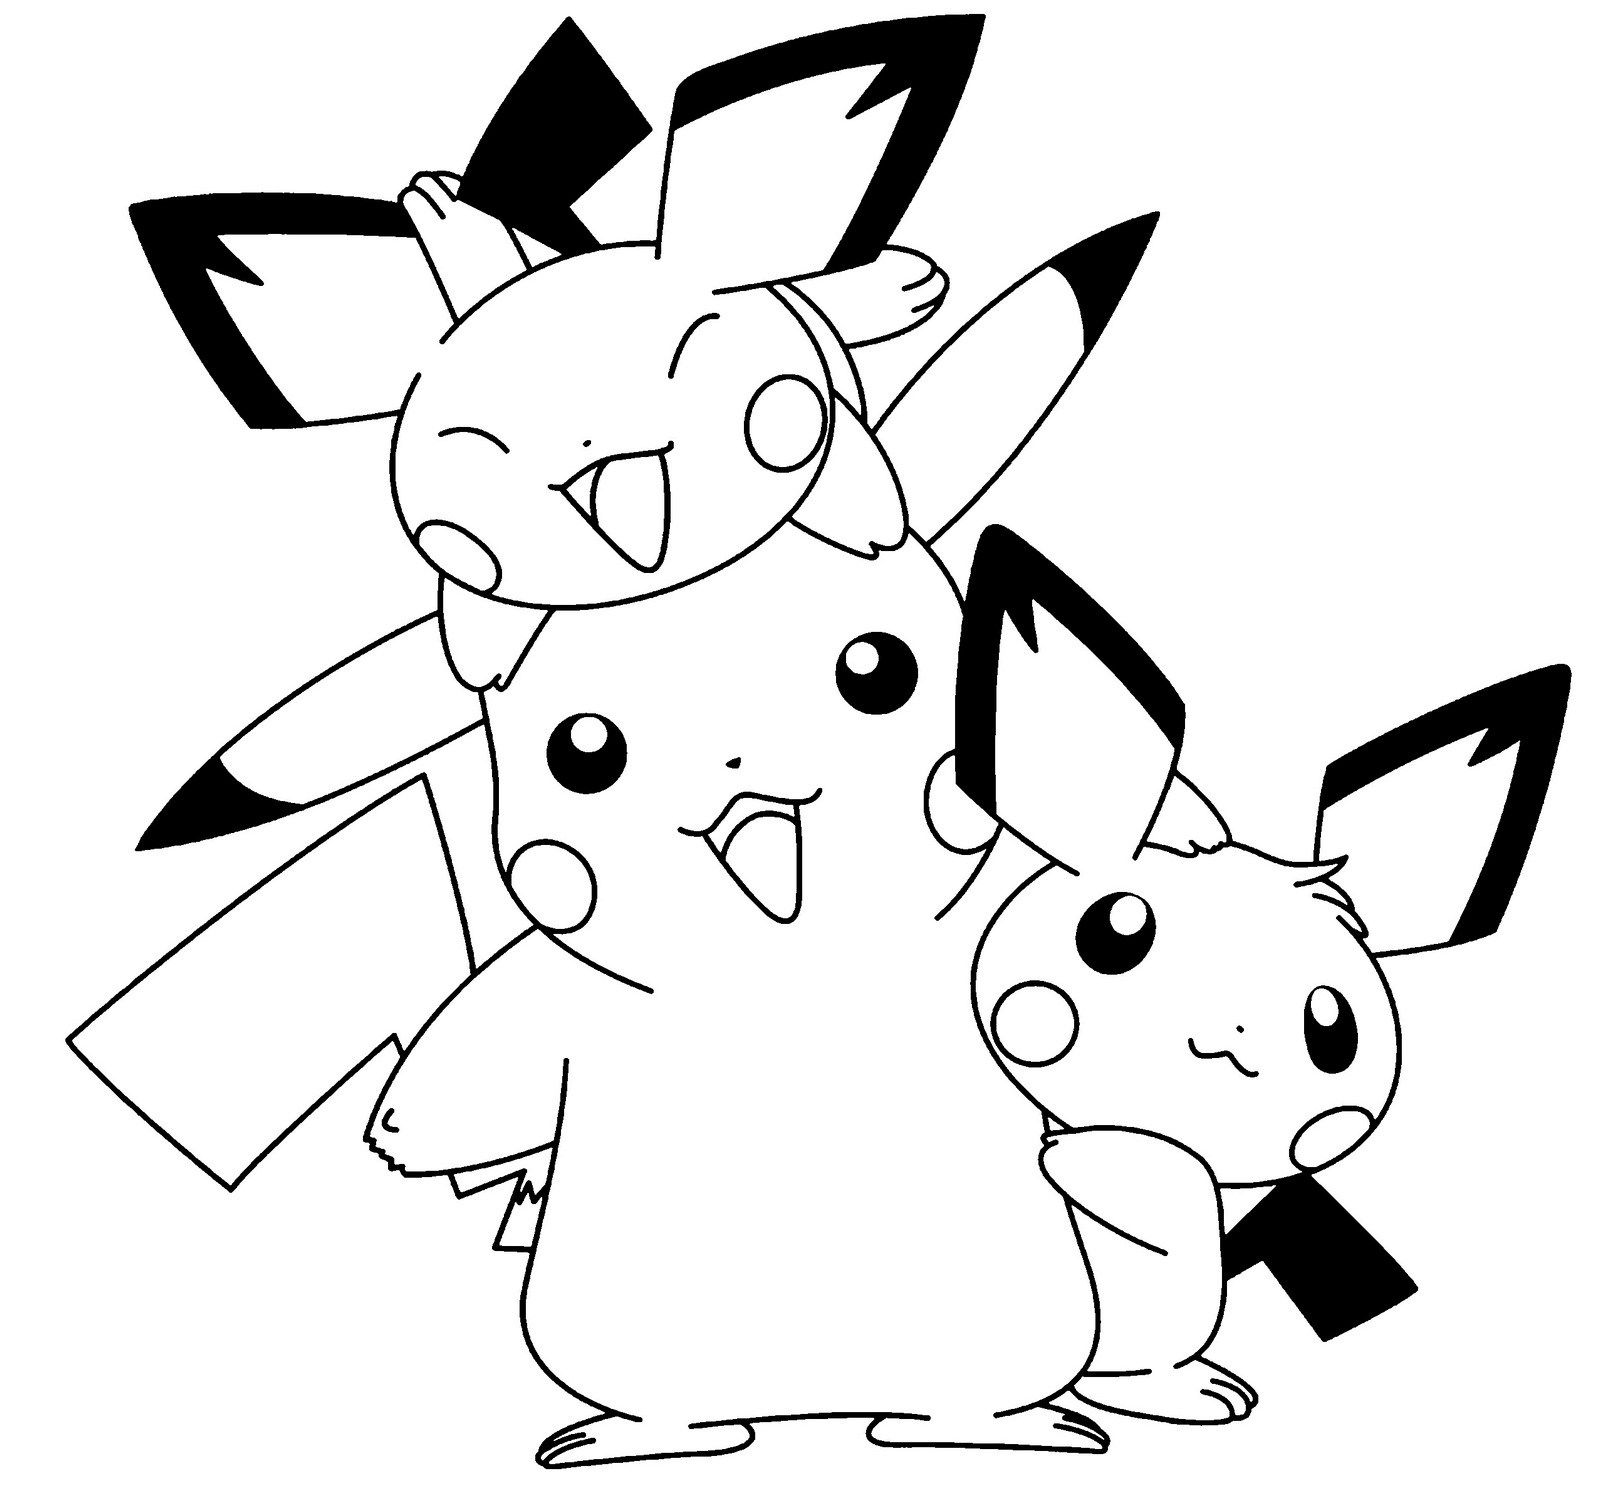 Pichu Pokemon Coloring Pages at GetColorings.com | Free printable